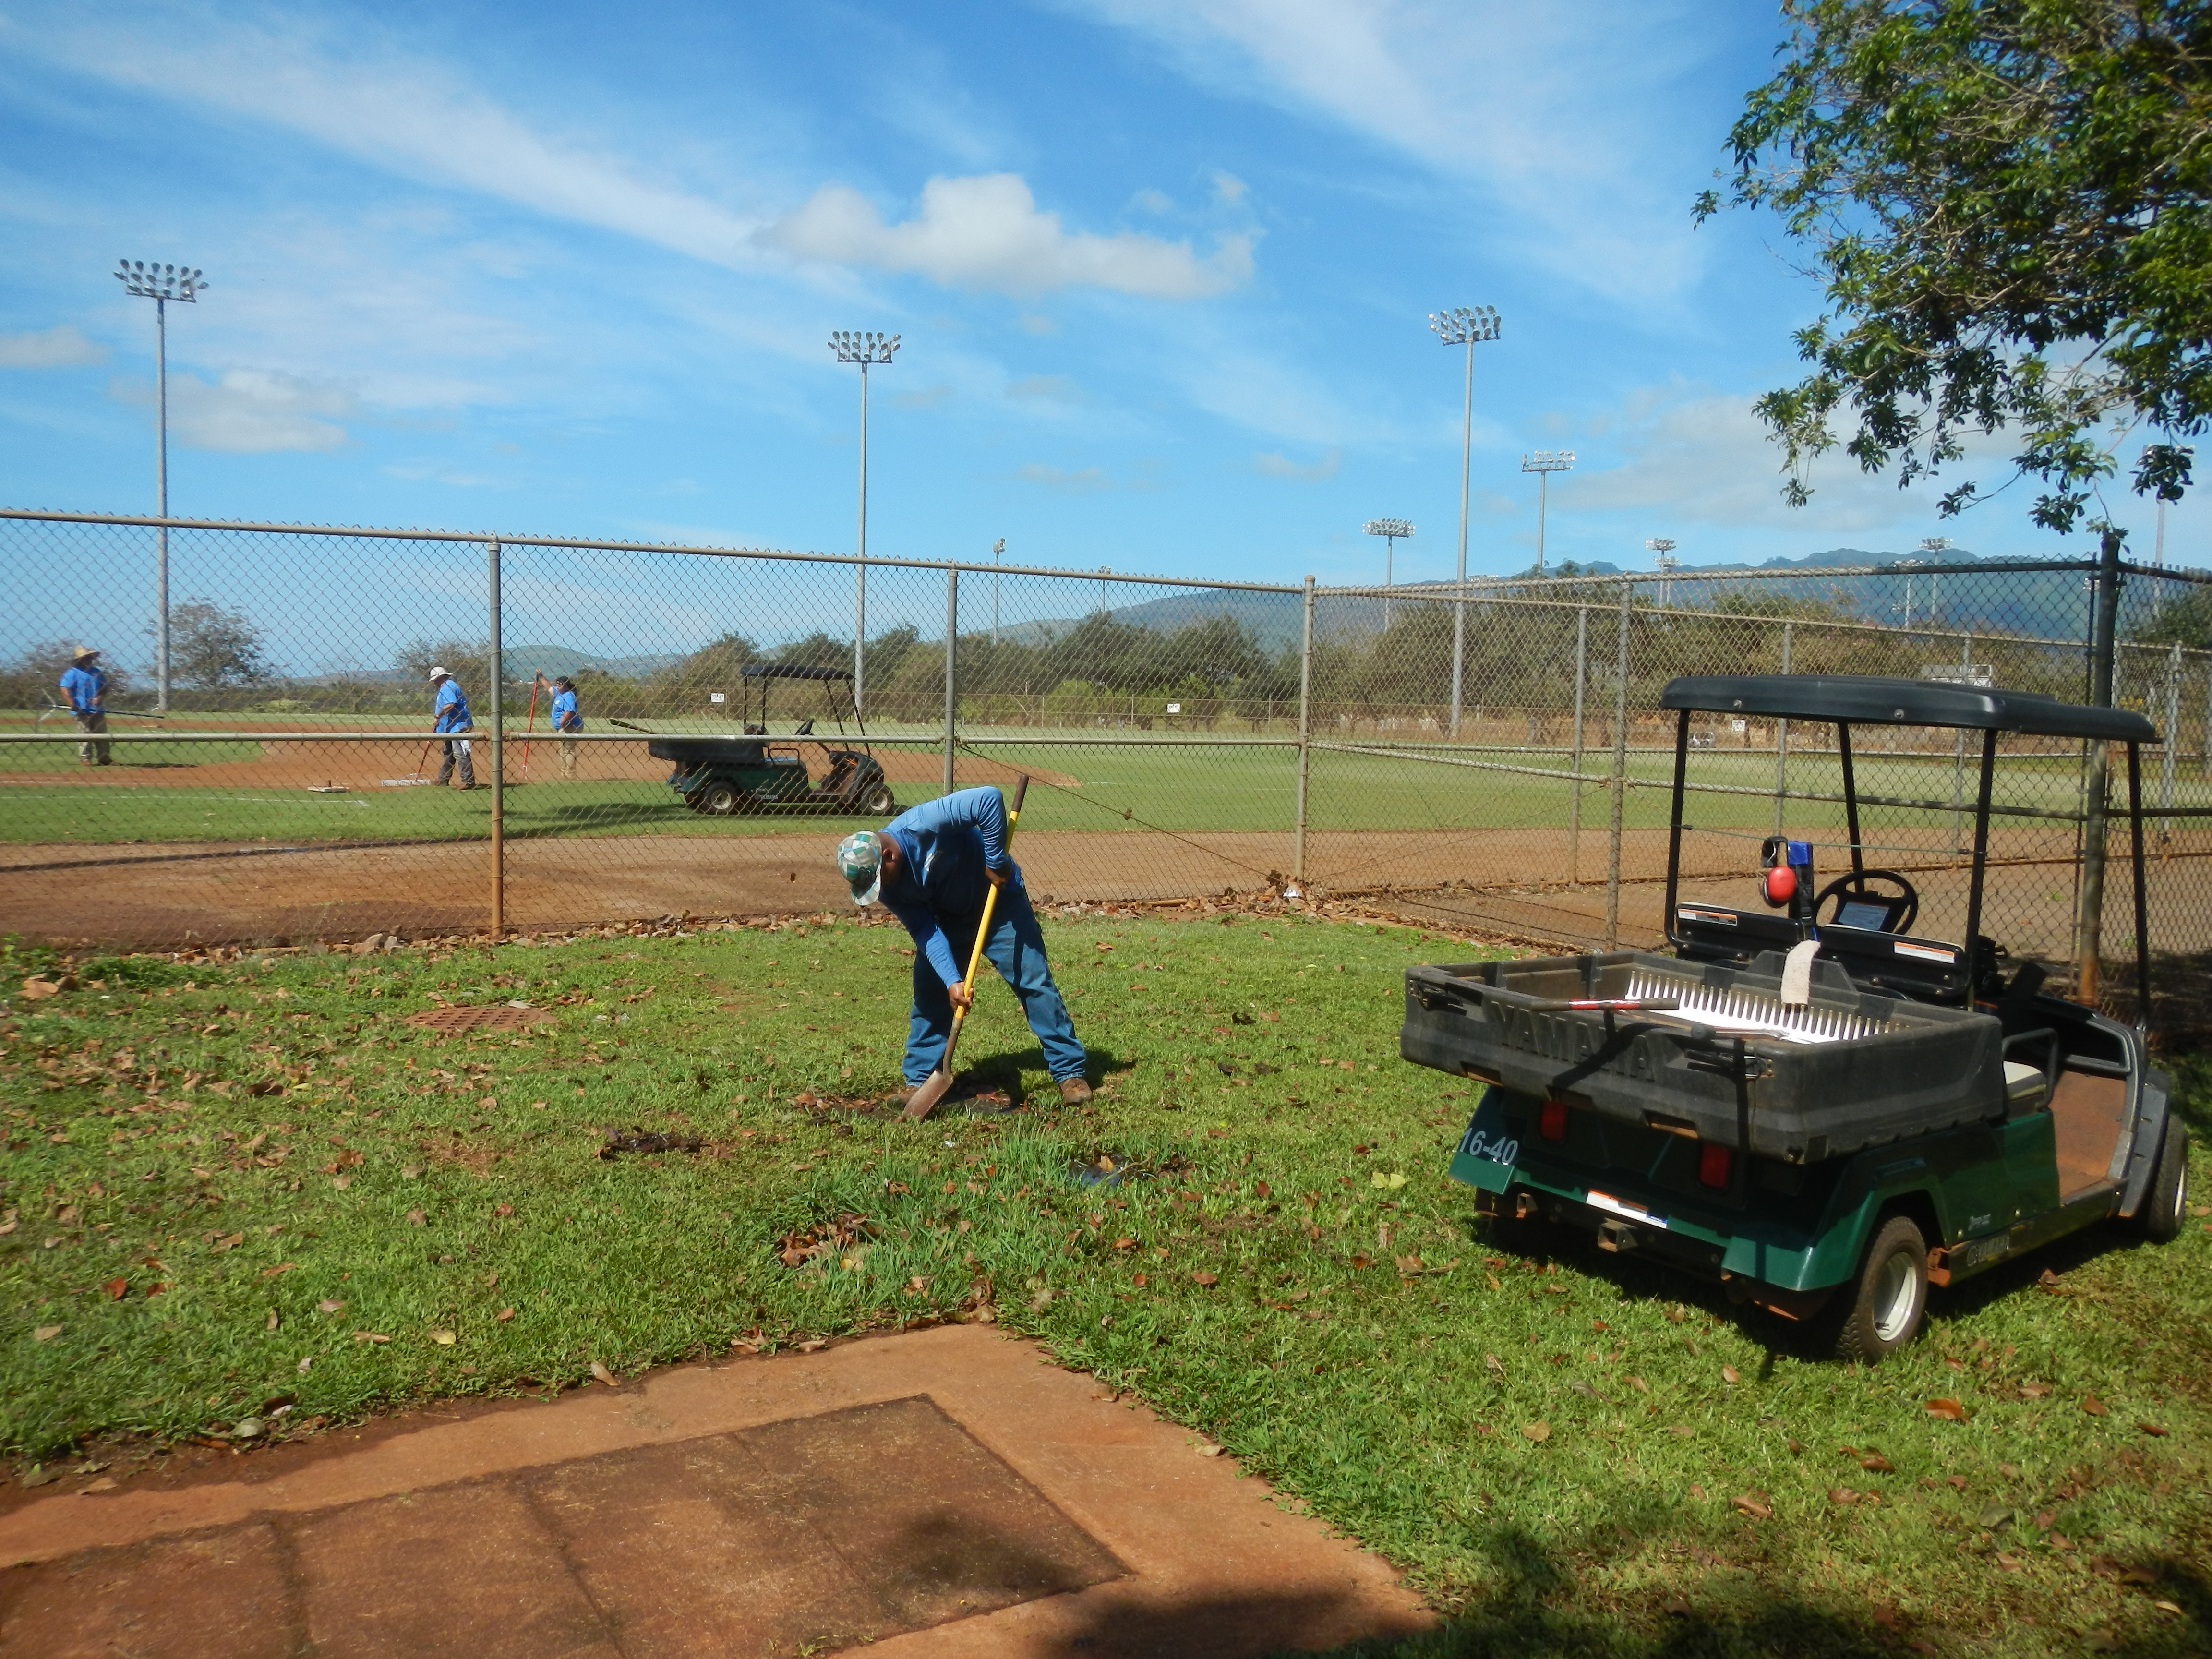 Lanai youngsters flock to baseball field